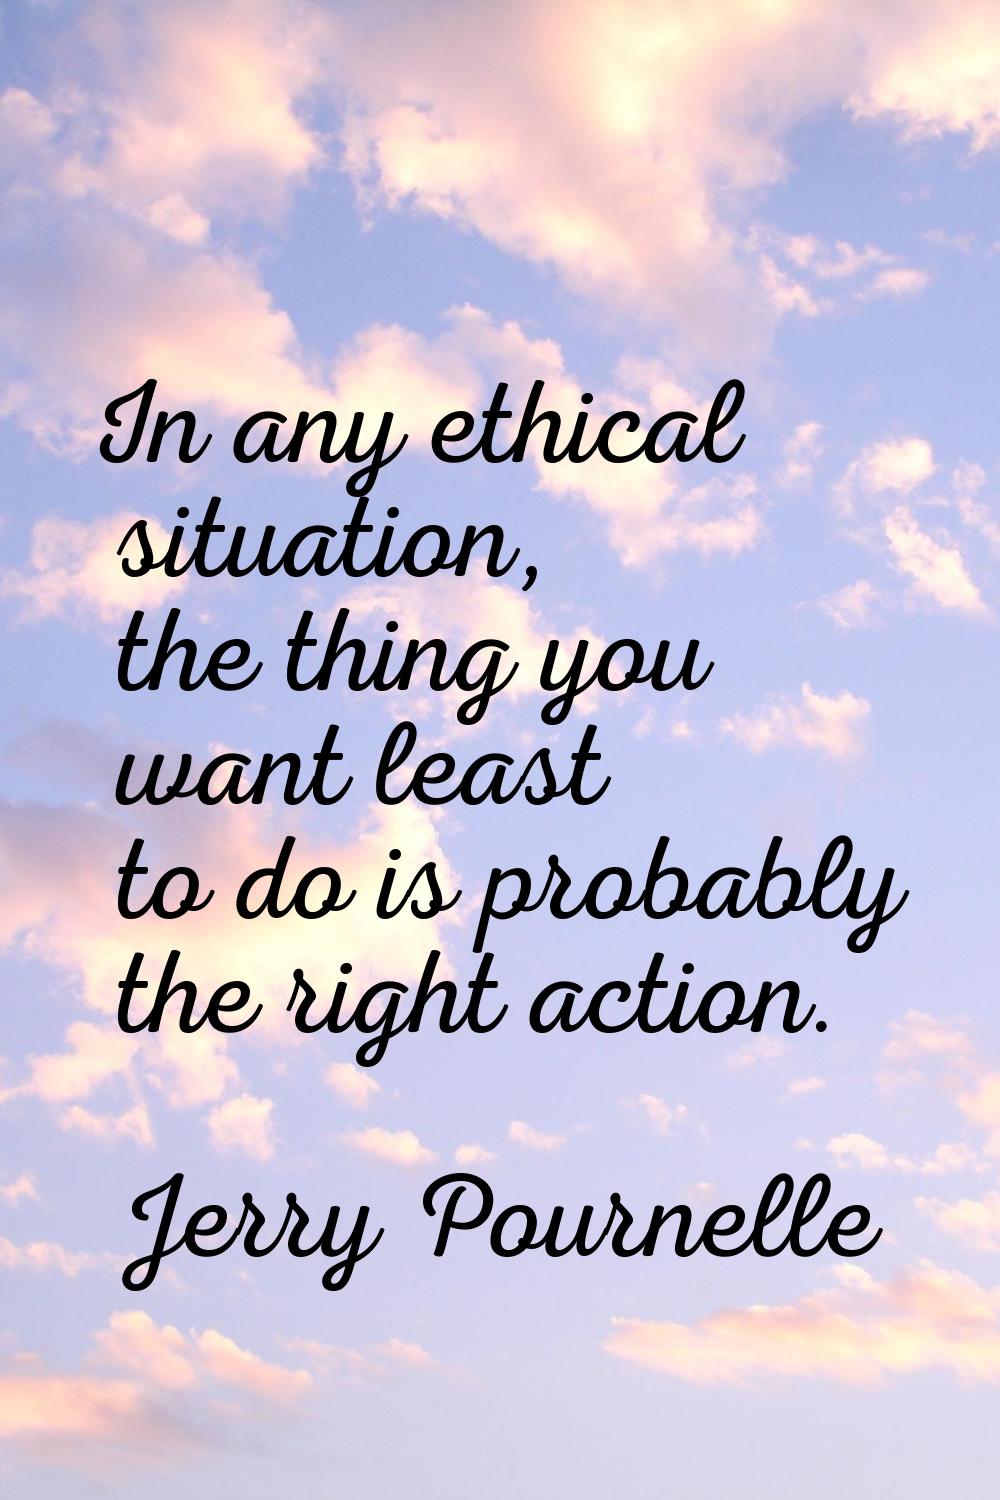 In any ethical situation, the thing you want least to do is probably the right action.